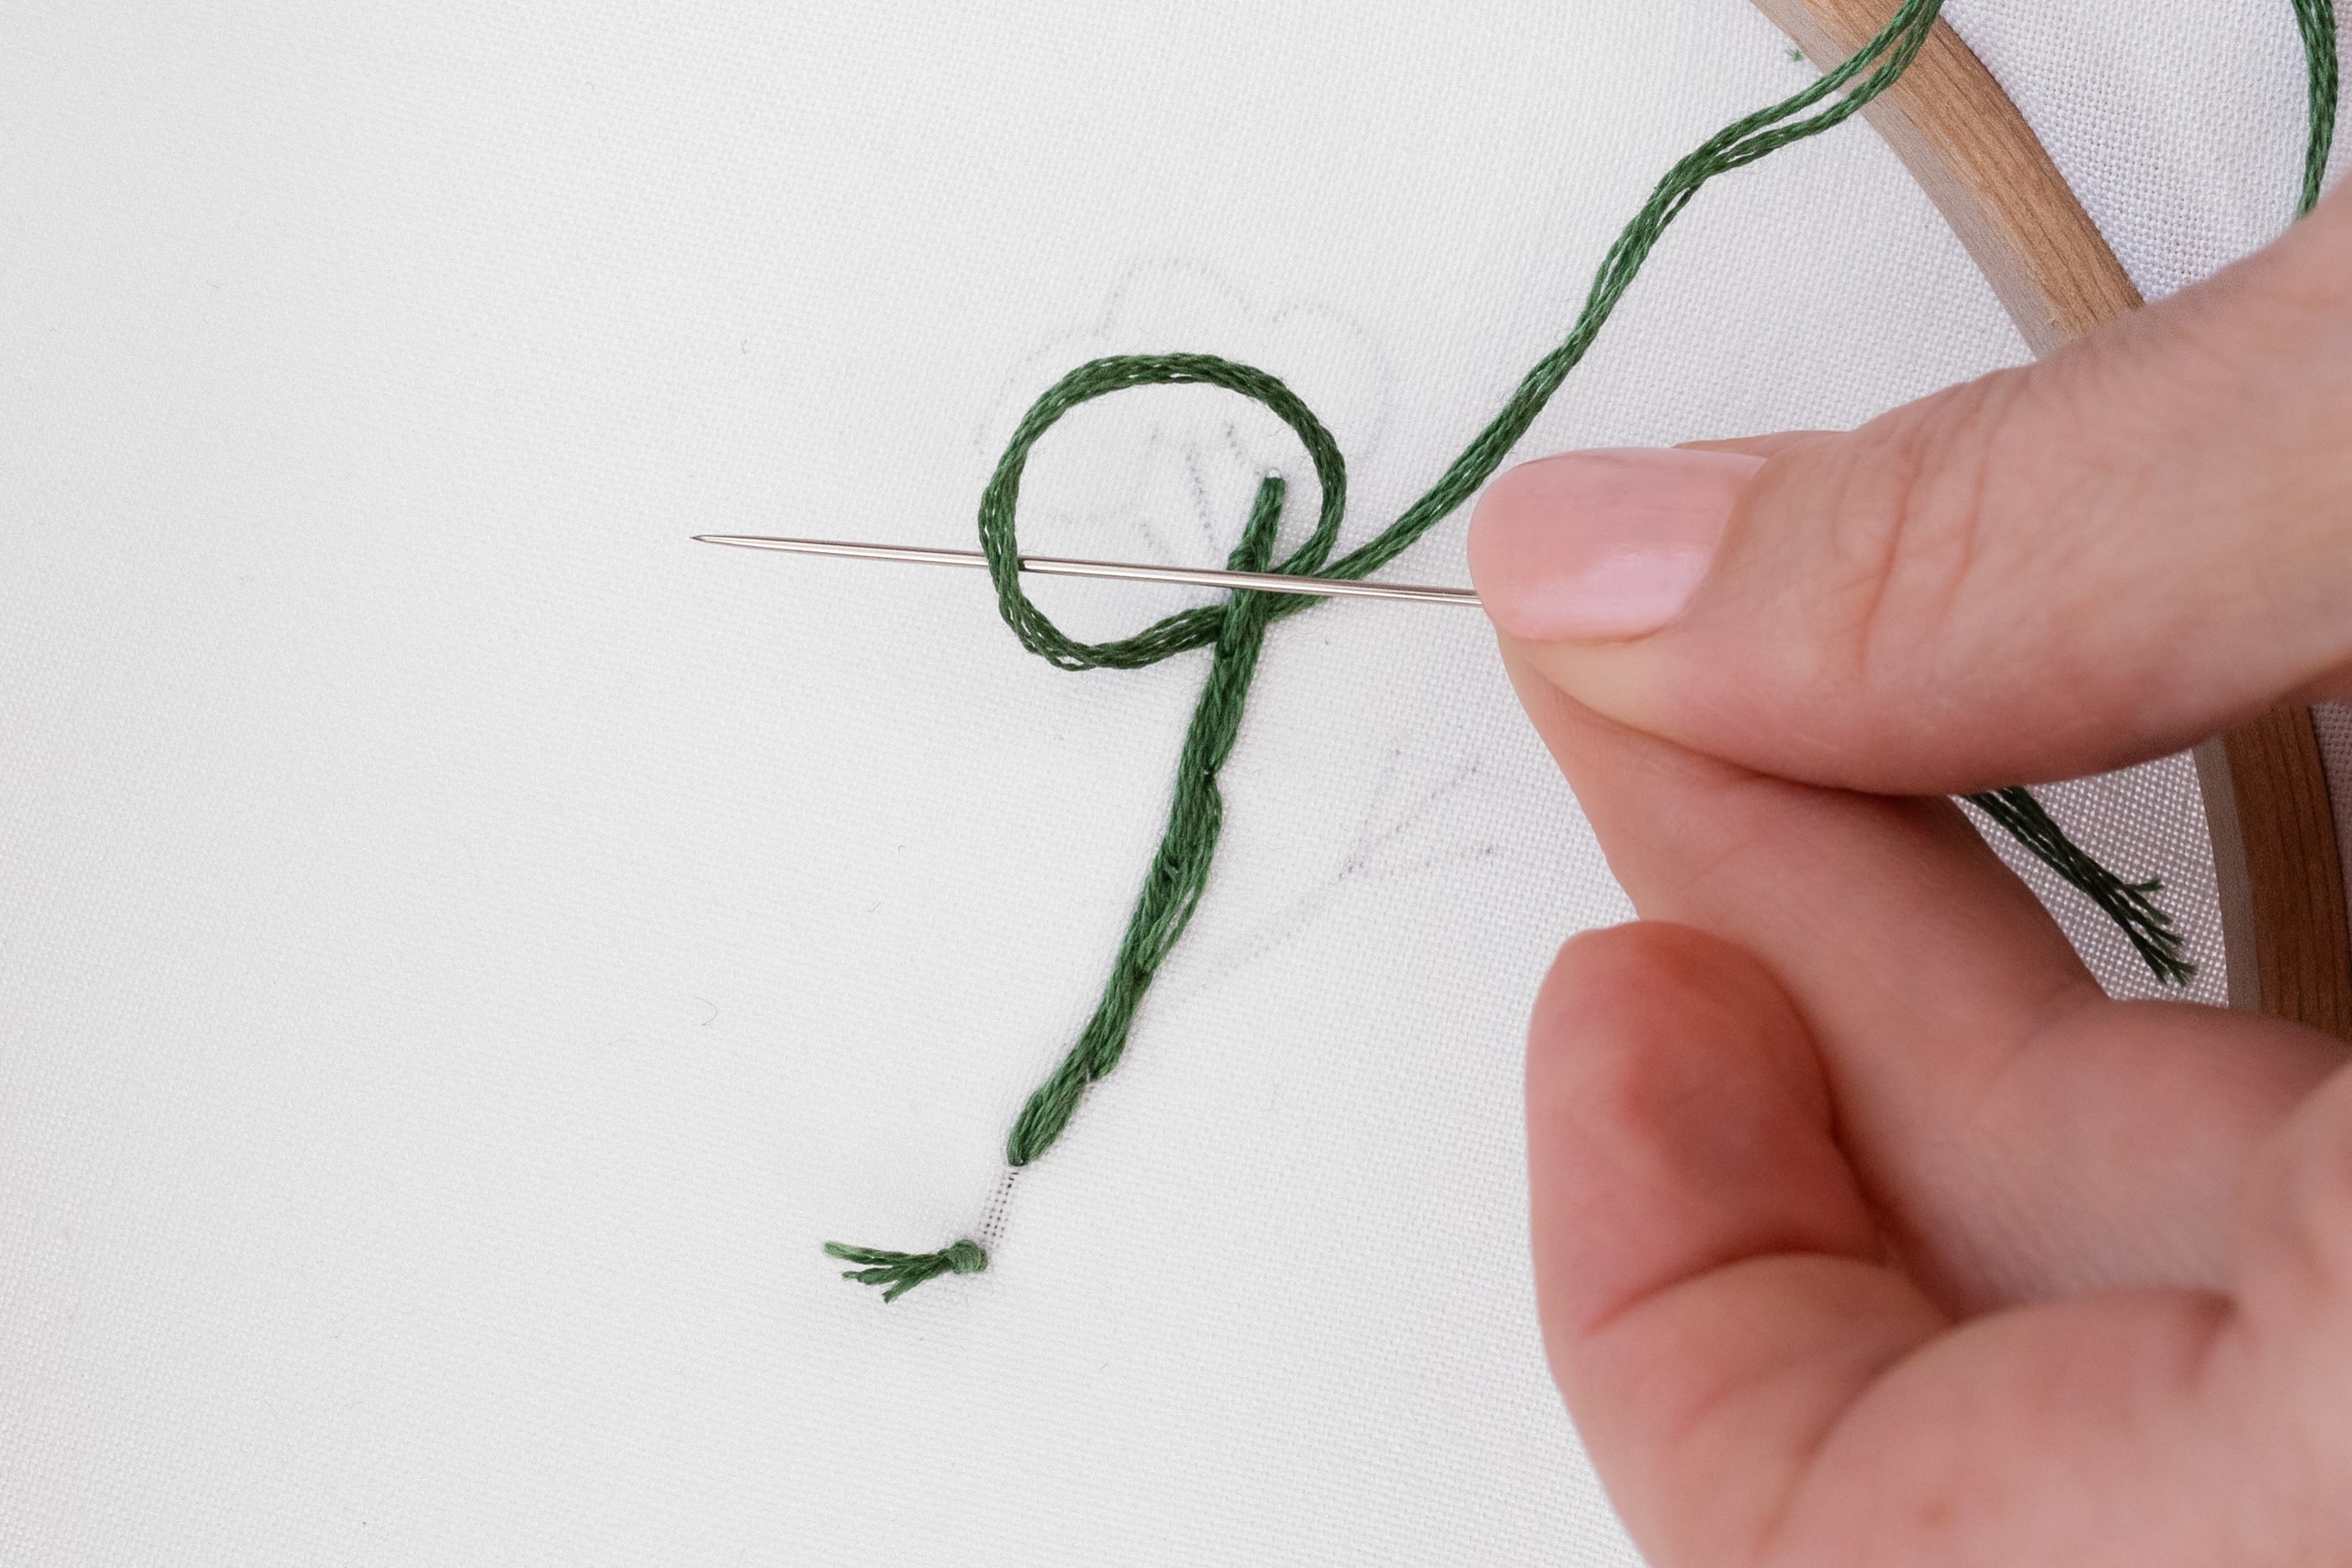 A needle pokes through a loop at the back of the stitching.